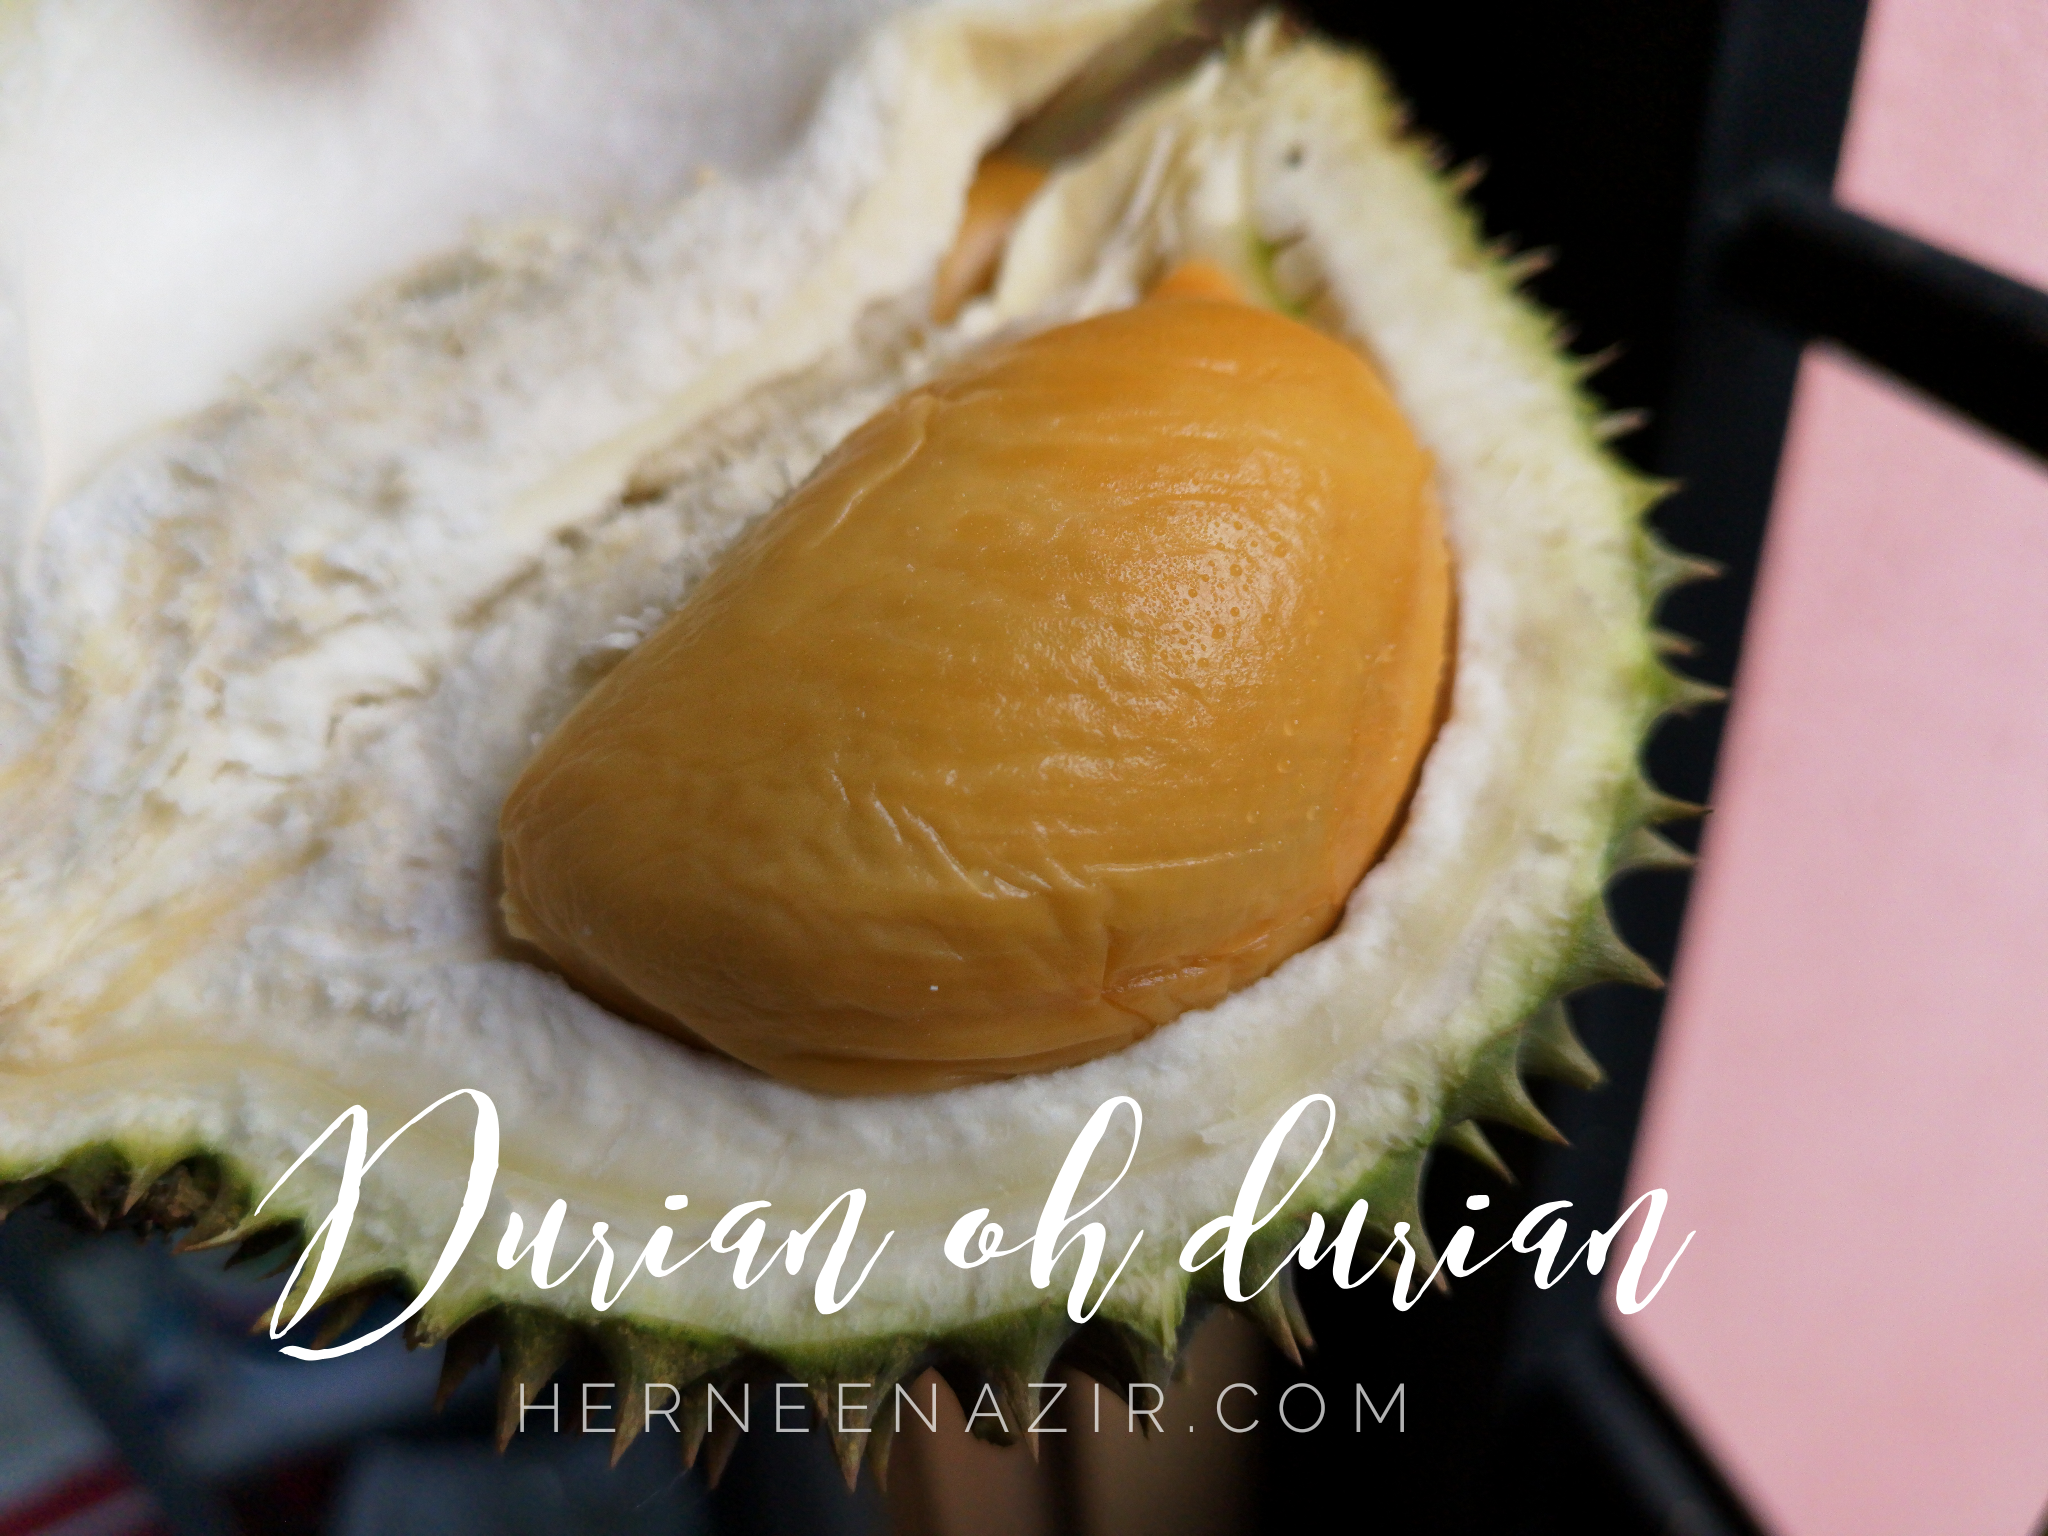 Wordless Wednesday 51 – Durian oh Durian